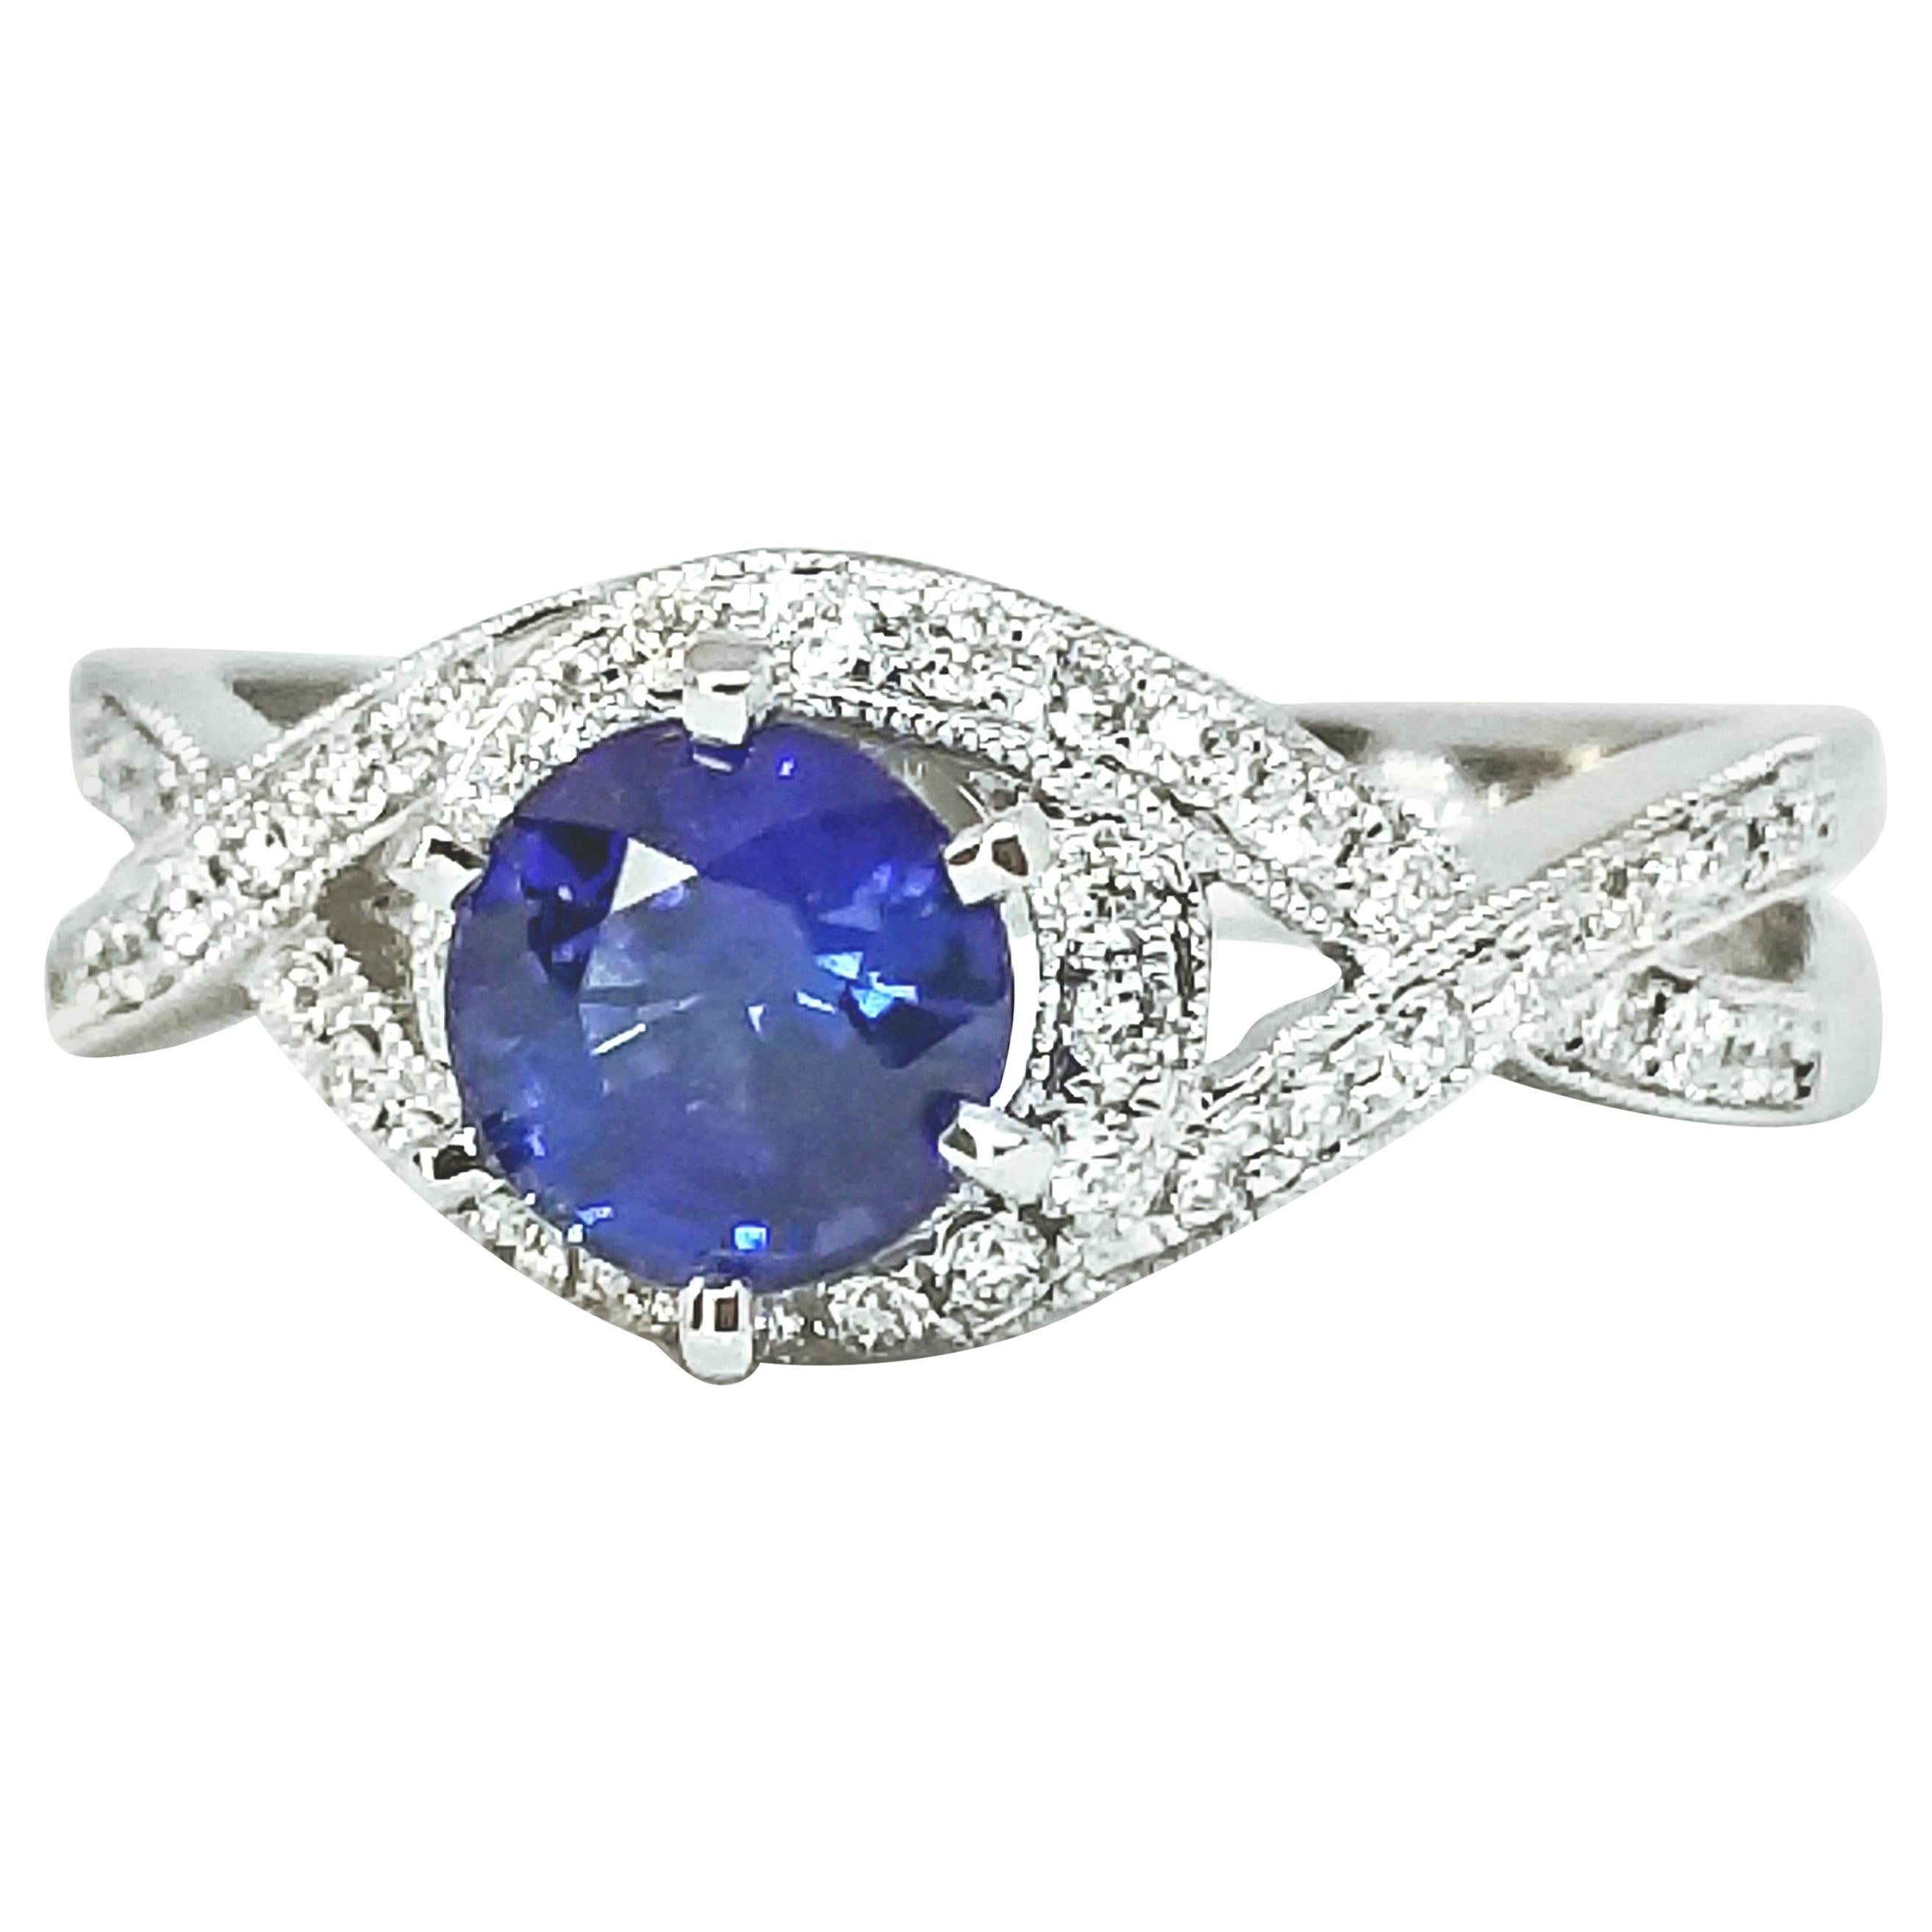 1.02 Carat Blue Sapphire White Gold Diamond Engagement or Right Hand Ring